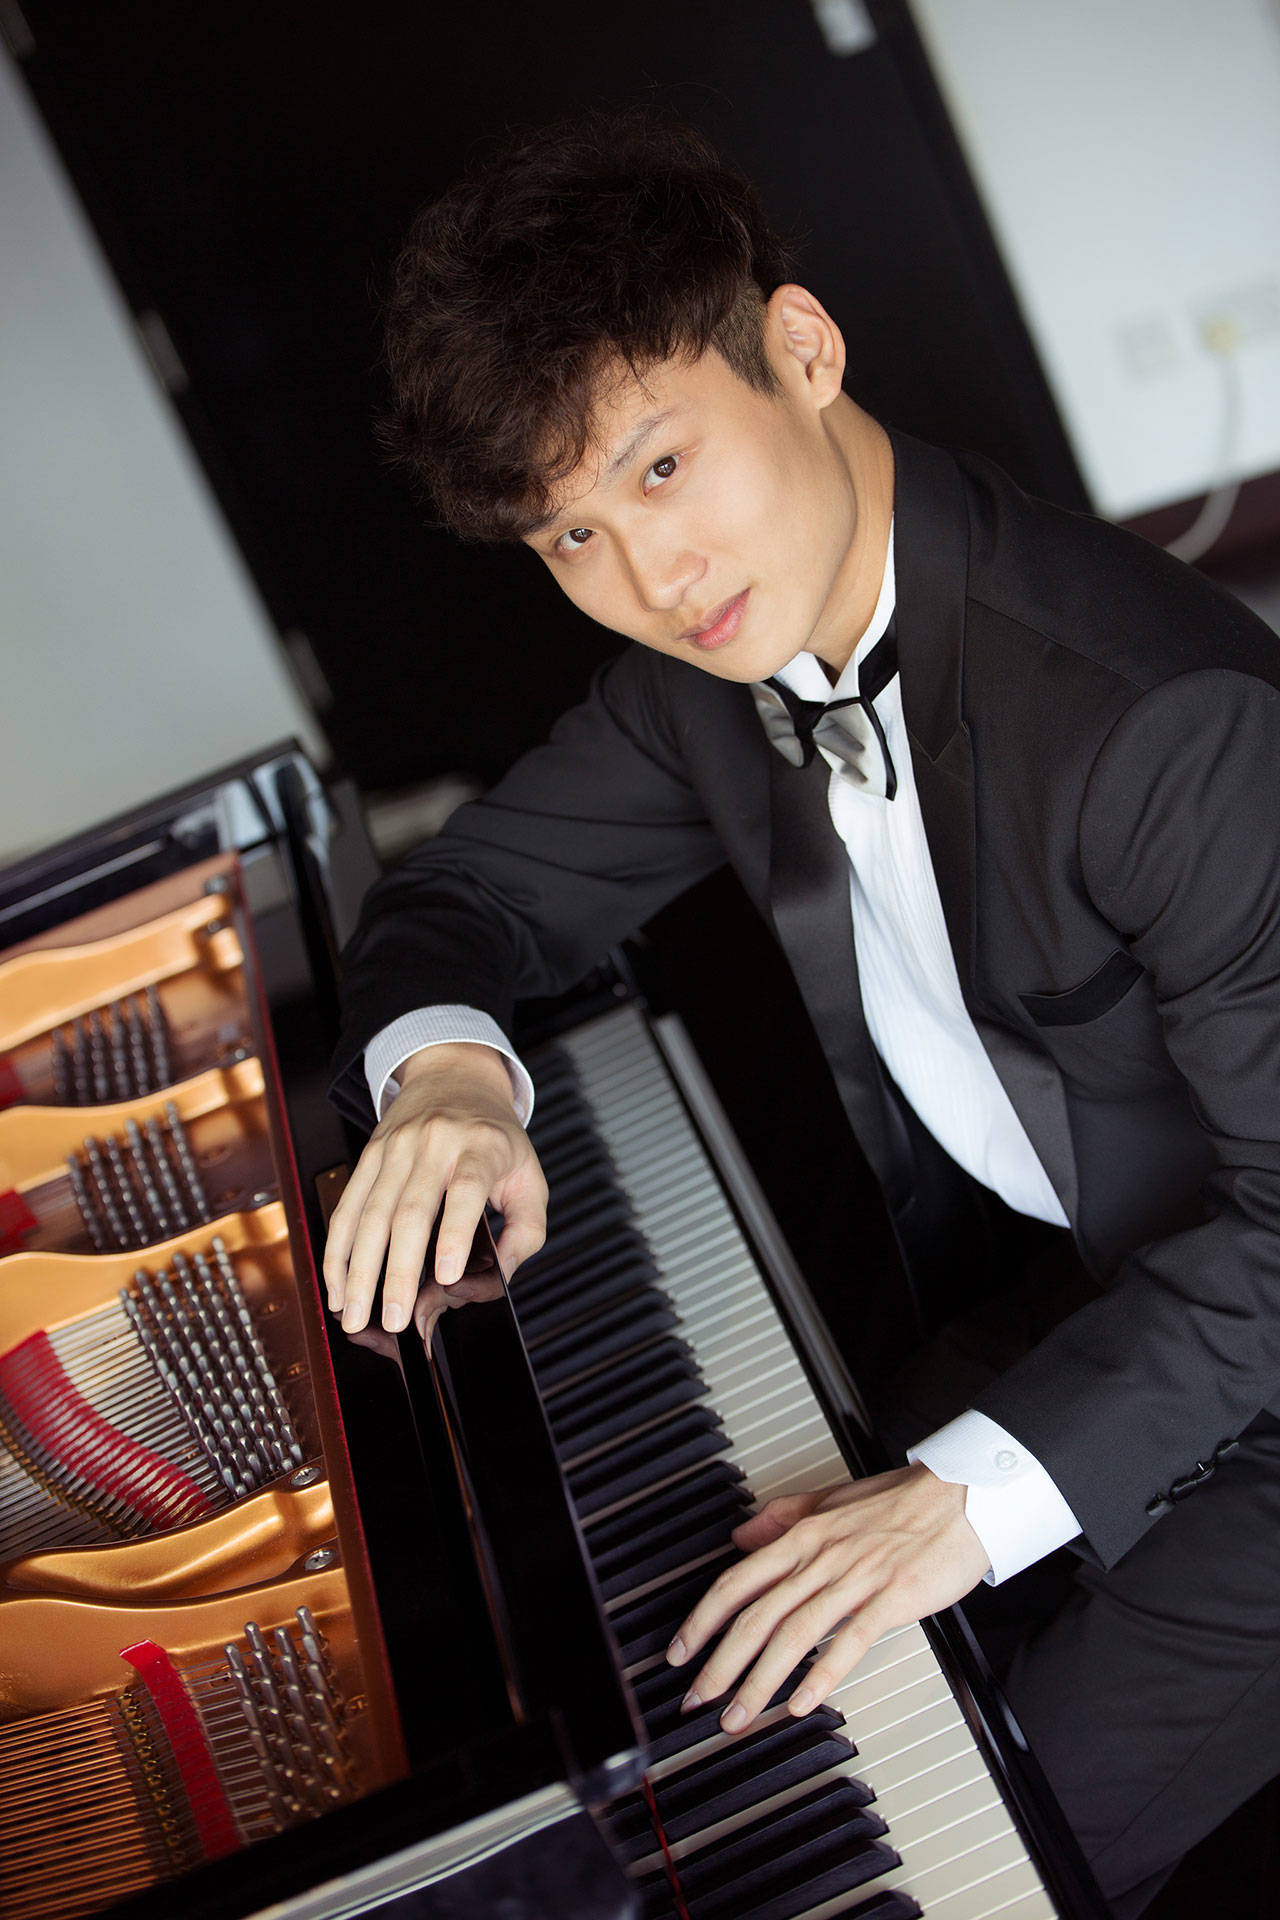 Anson Ka-Lik Sin performs classical piano for St. Luke’s Music Live at One in St. Luke’s Episcopal Church on Tuesday, April 9. Submitted photo